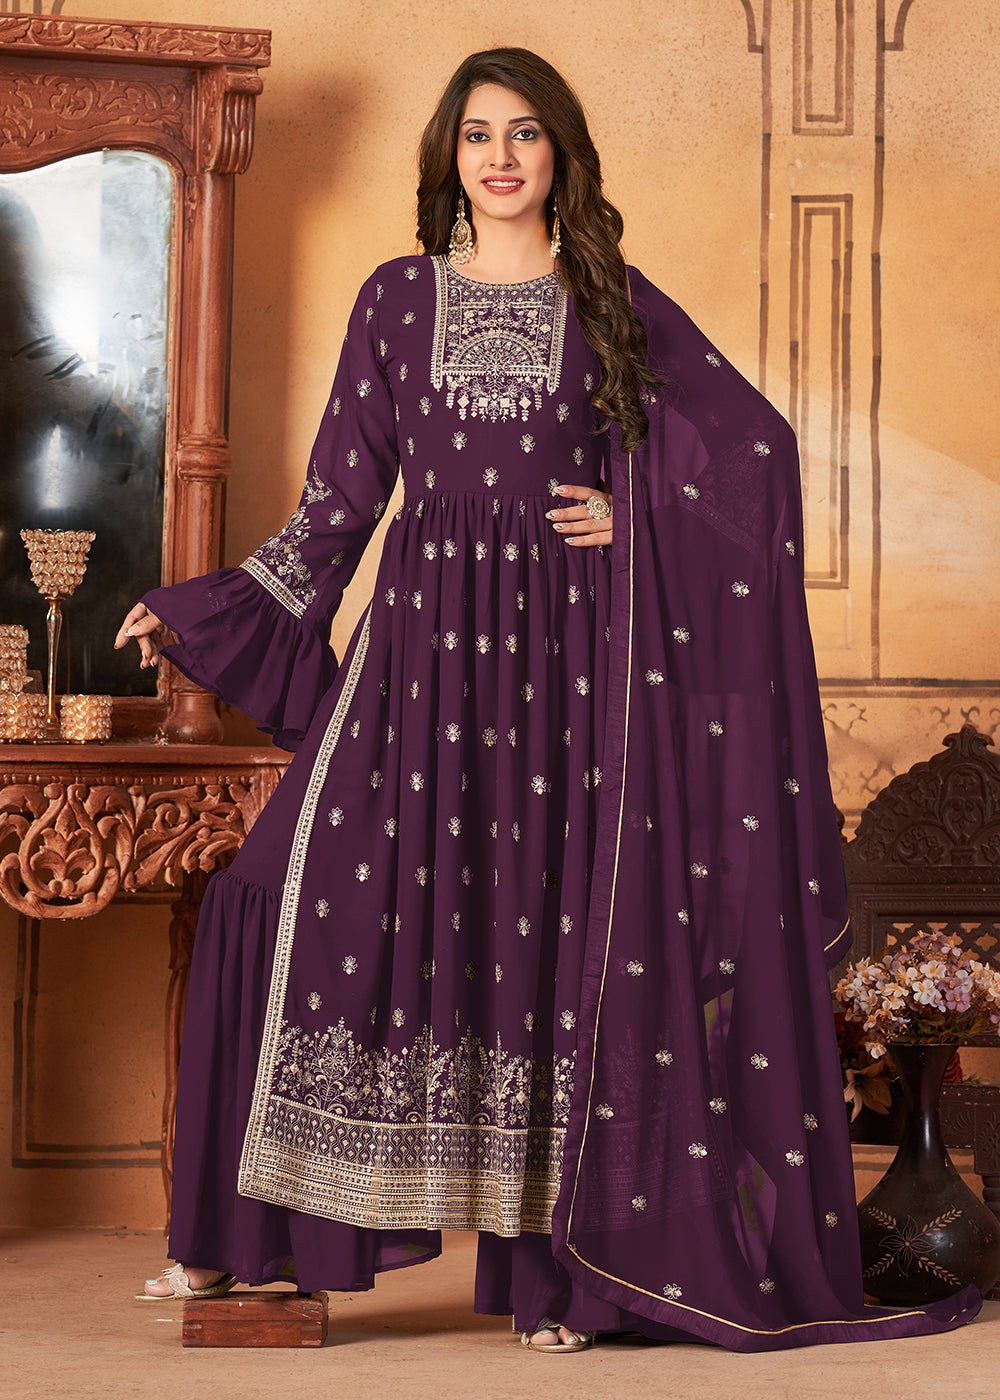 Buy Now Bell Sleeved Fascinating Purple Wedding Function Suit Set Online in USA, UK, Canada & Worldwide at Empress Clothing. 